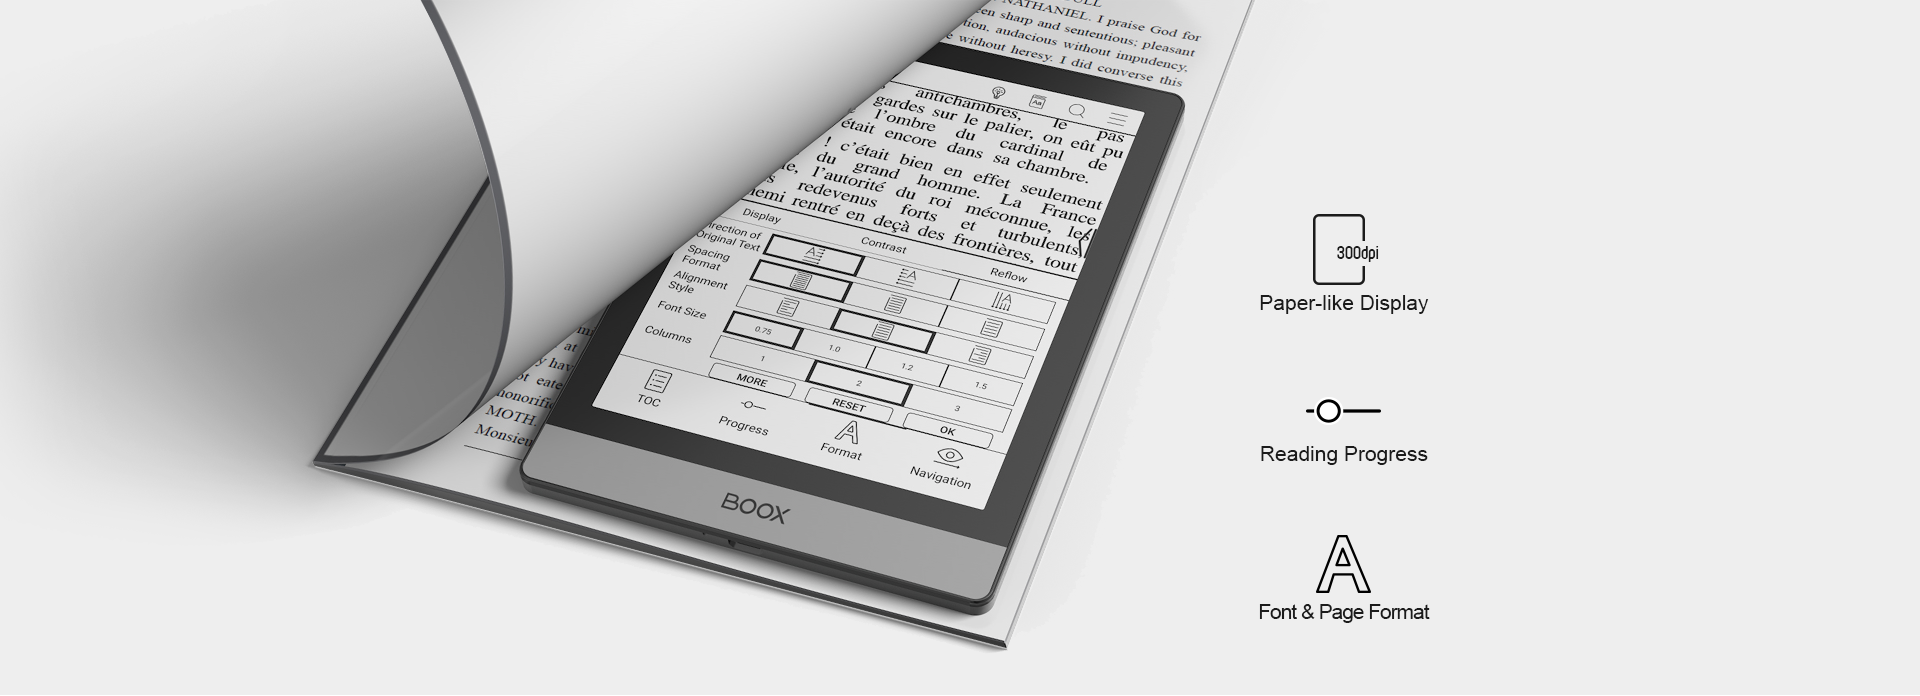 BOOX Poke2 6" eInk Display (300ppi) Android 9 eReader in Malaysia